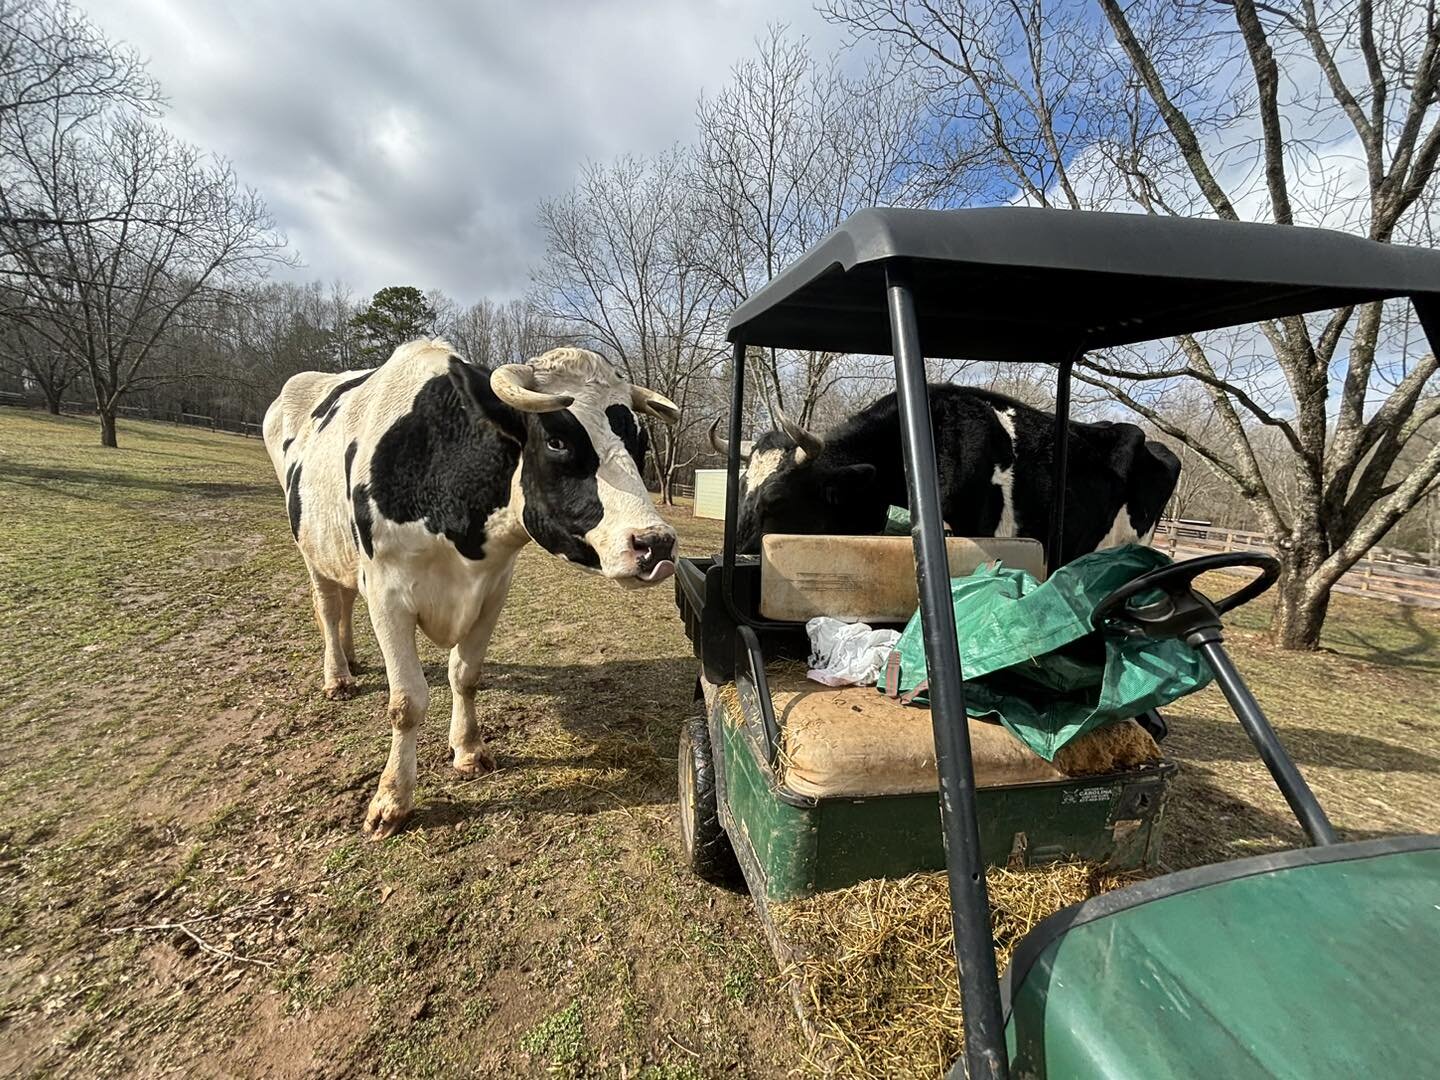 Got pulled over by the authorities today. And now they&rsquo;re searching my vehicle! 😉 

Officer Zeek came in for a closer inspection, then let me off with just a warning. 

#farmsanctuary #cows